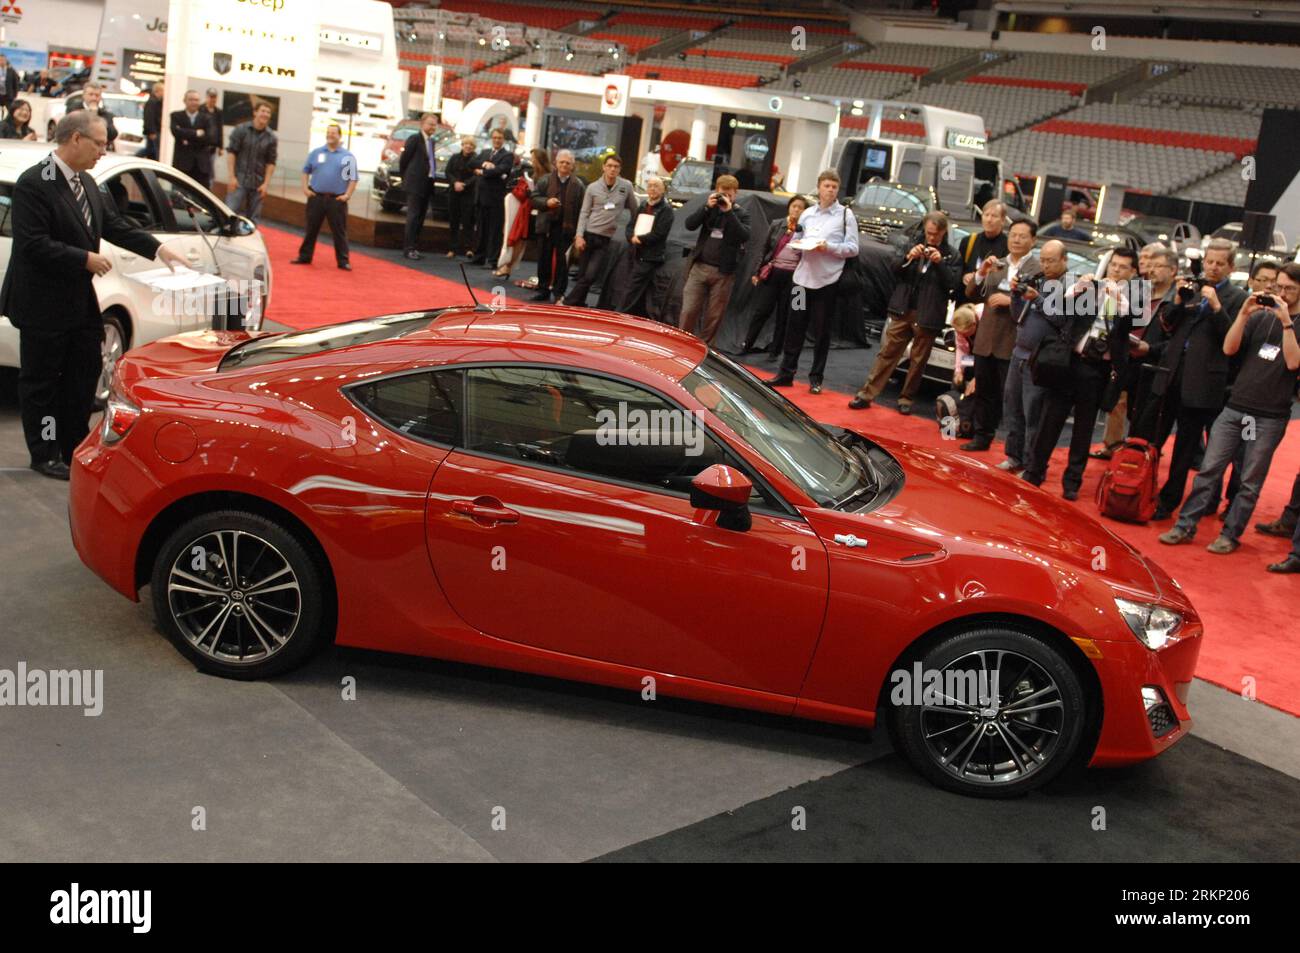 Bildnummer: 57862135  Datum: 03.04.2012  Copyright: imago/Xinhua (120404) -- VANCOUVER, April 4, 2012 (Xinhua) -- Toyota s hybrid 2013 Scion FR-S is displayed at the Vancouver International Auto Show in Vancouver, Canada, April 3, 2012. The 92nd Vancouver International Auto Show opened on Tuesday. (Xinhua/Sergei Bachlakov) CANADA-VANCOUVER-AUTO SHOW PUBLICATIONxNOTxINxCHN Wirtschaft Messe Automesse Autoindustrie premiumd xns x0x 2012 quer      57862135 Date 03 04 2012 Copyright Imago XINHUA  Vancouver April 4 2012 XINHUA Toyota S Hybrid 2013 Scion Fri S IS displayed AT The Vancouver Internatio Stock Photo